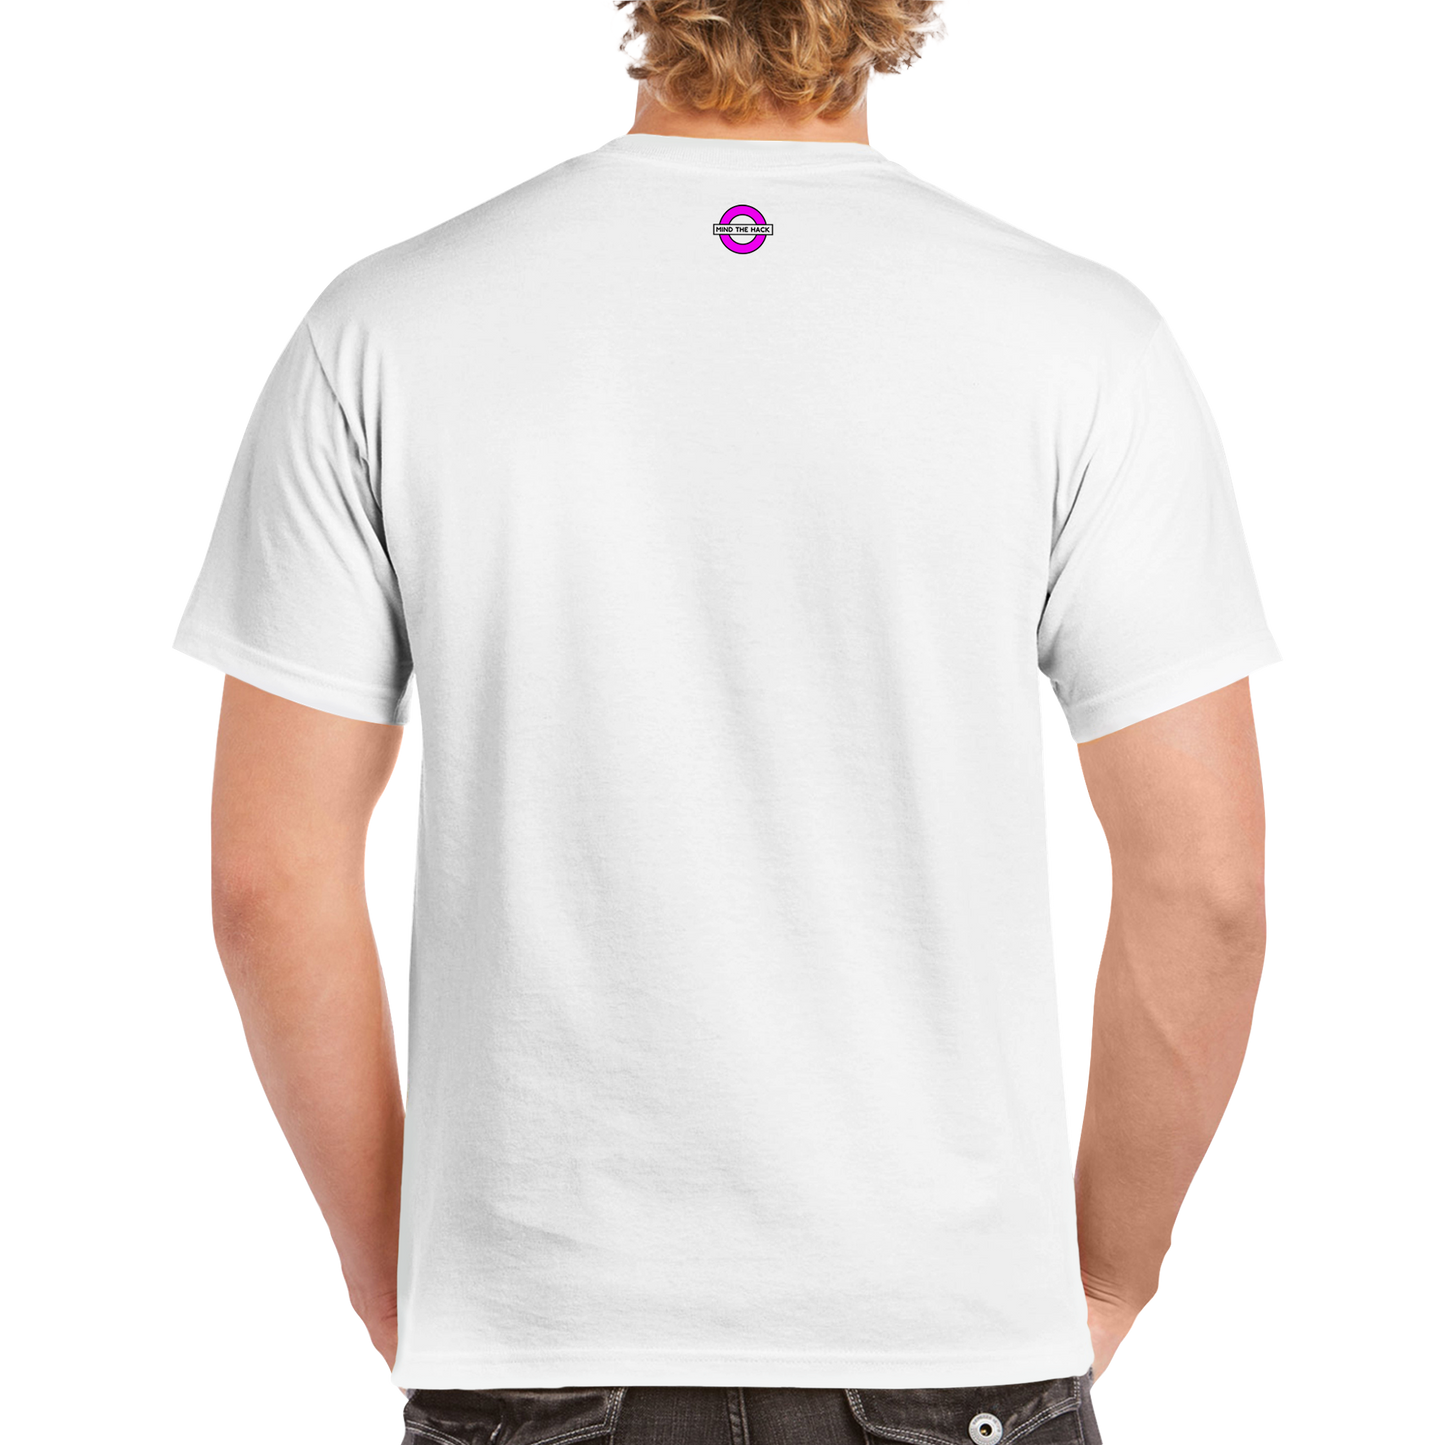 mindthehack.club banner in a trendy style Unisex T-Shirt